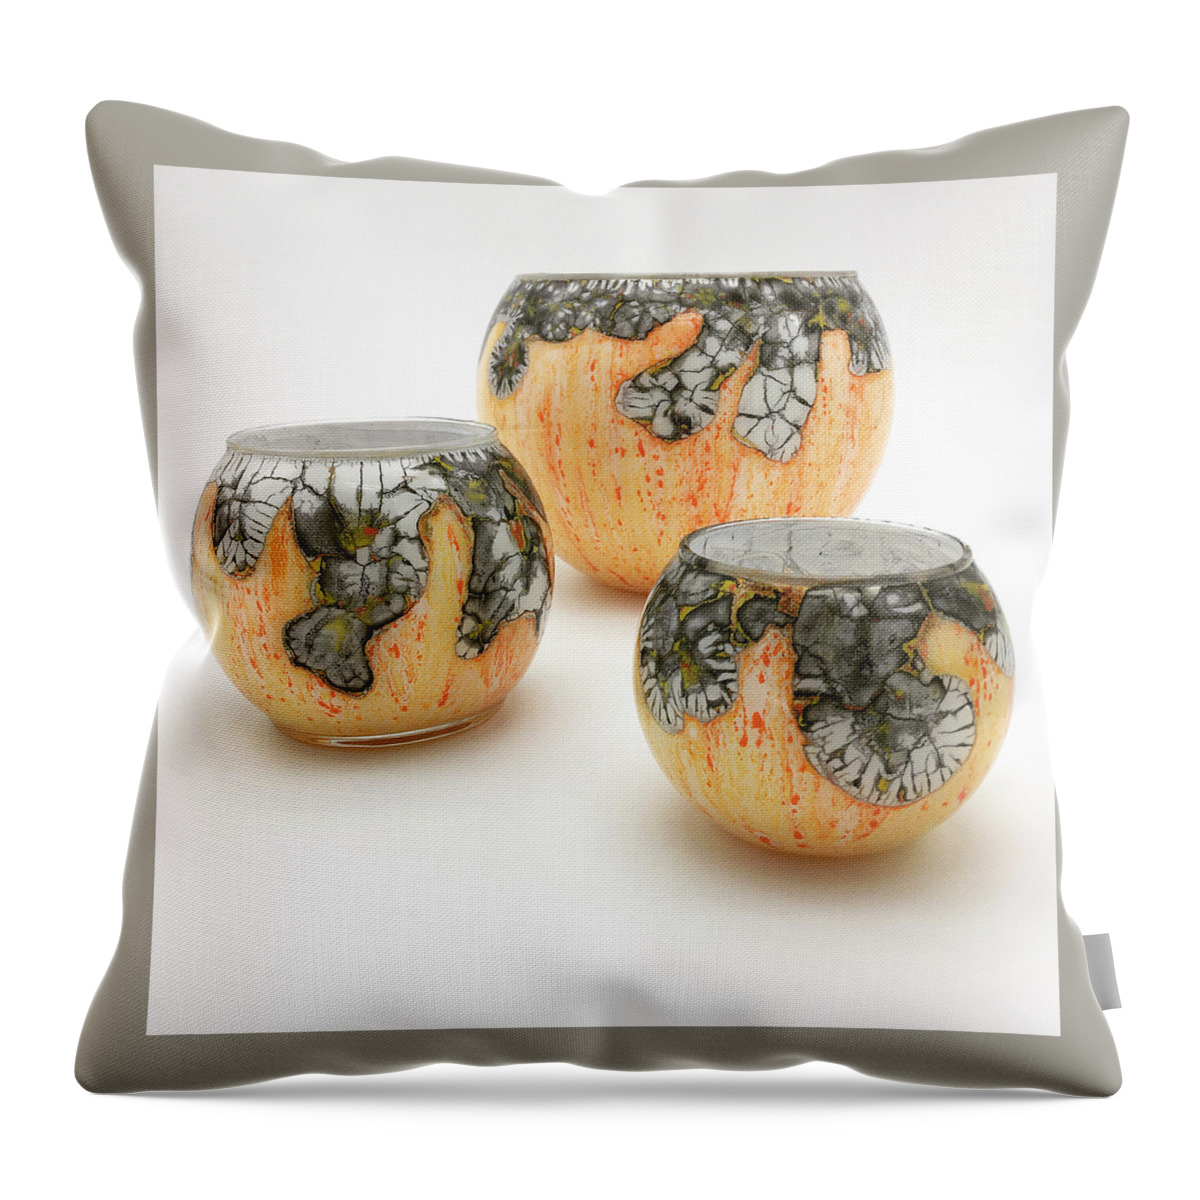 Glass Throw Pillow featuring the mixed media Yellow and White Bowls by Christopher Schranck